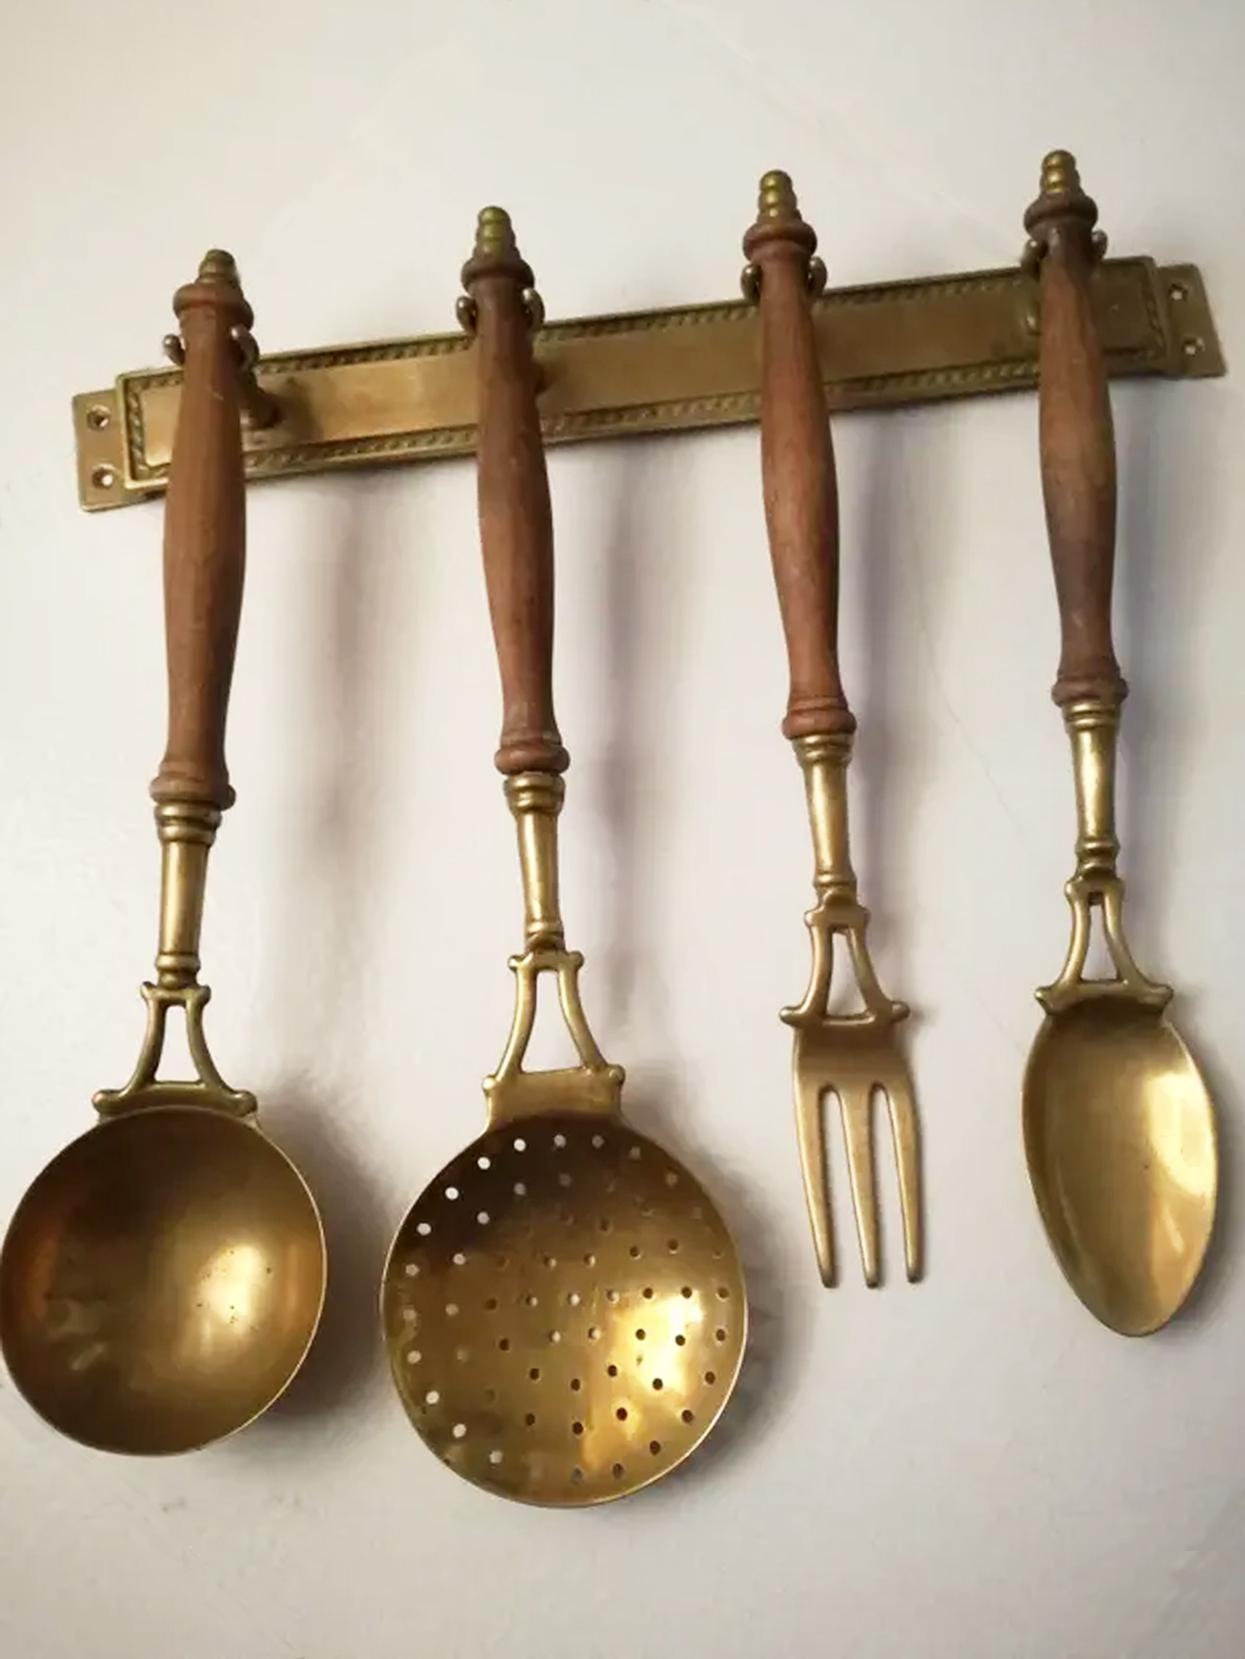 Old Kitchen Utensils Made of Brass with from a Hanging Bar, Early 20th Century 2